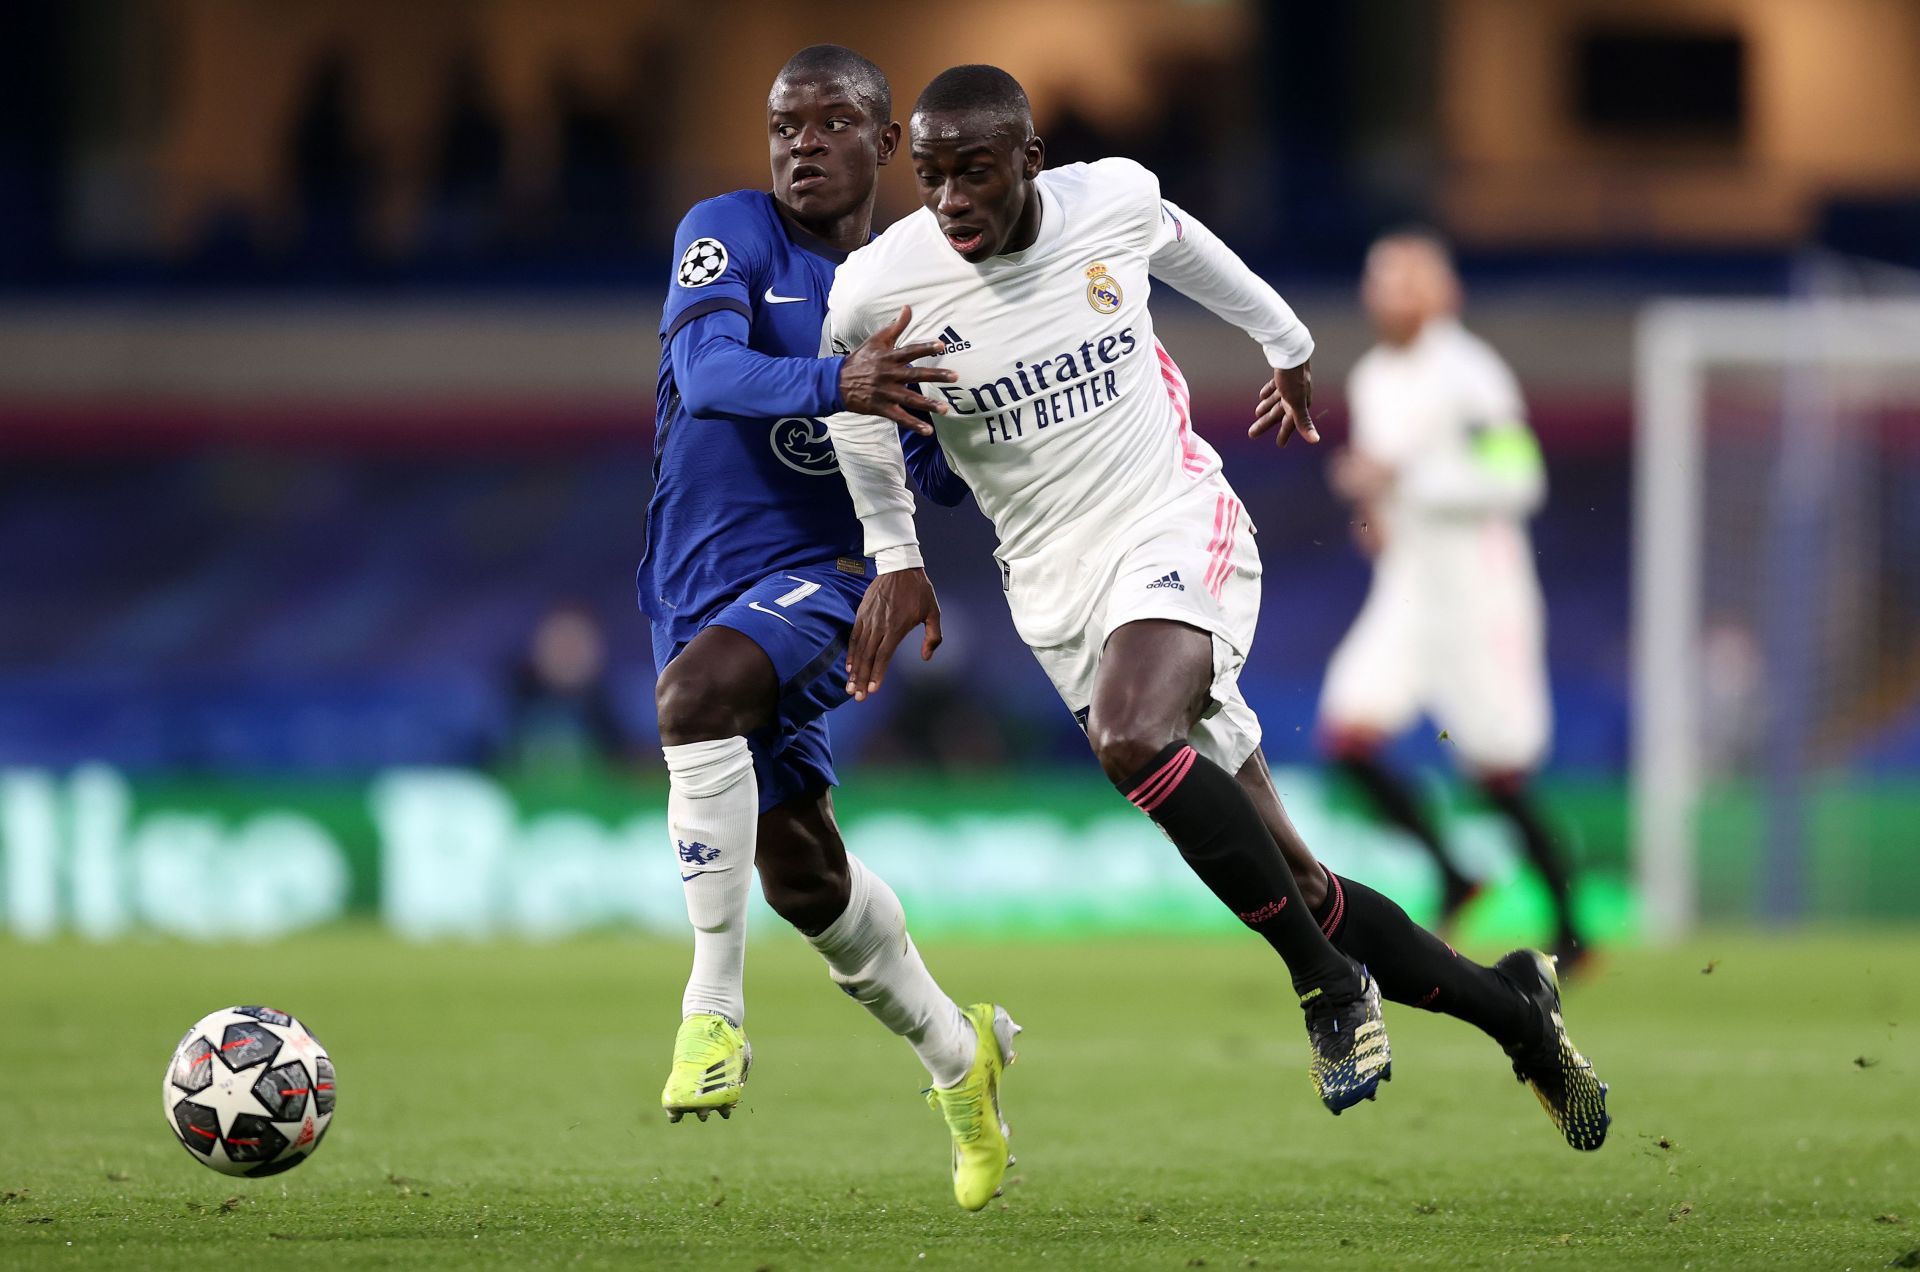 Mendy in action vs Chelsea in the UEFA Champions League Semi Final: Leg Two